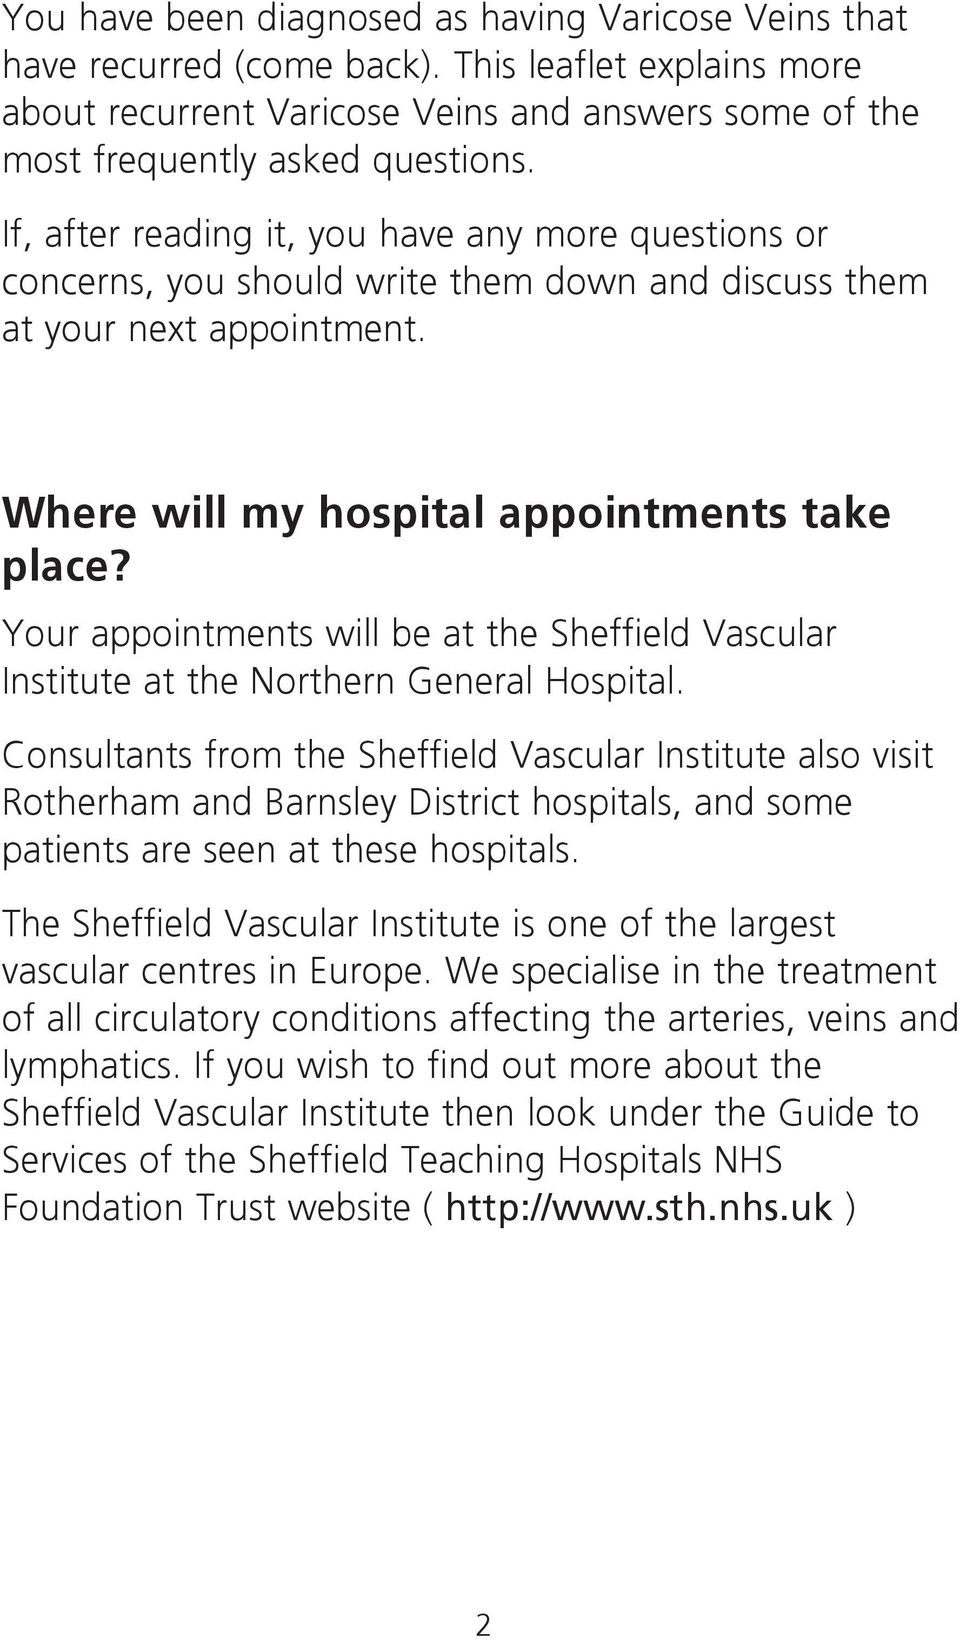 Your appointments will be at the Sheffield Vascular Institute at the Northern General Hospital.